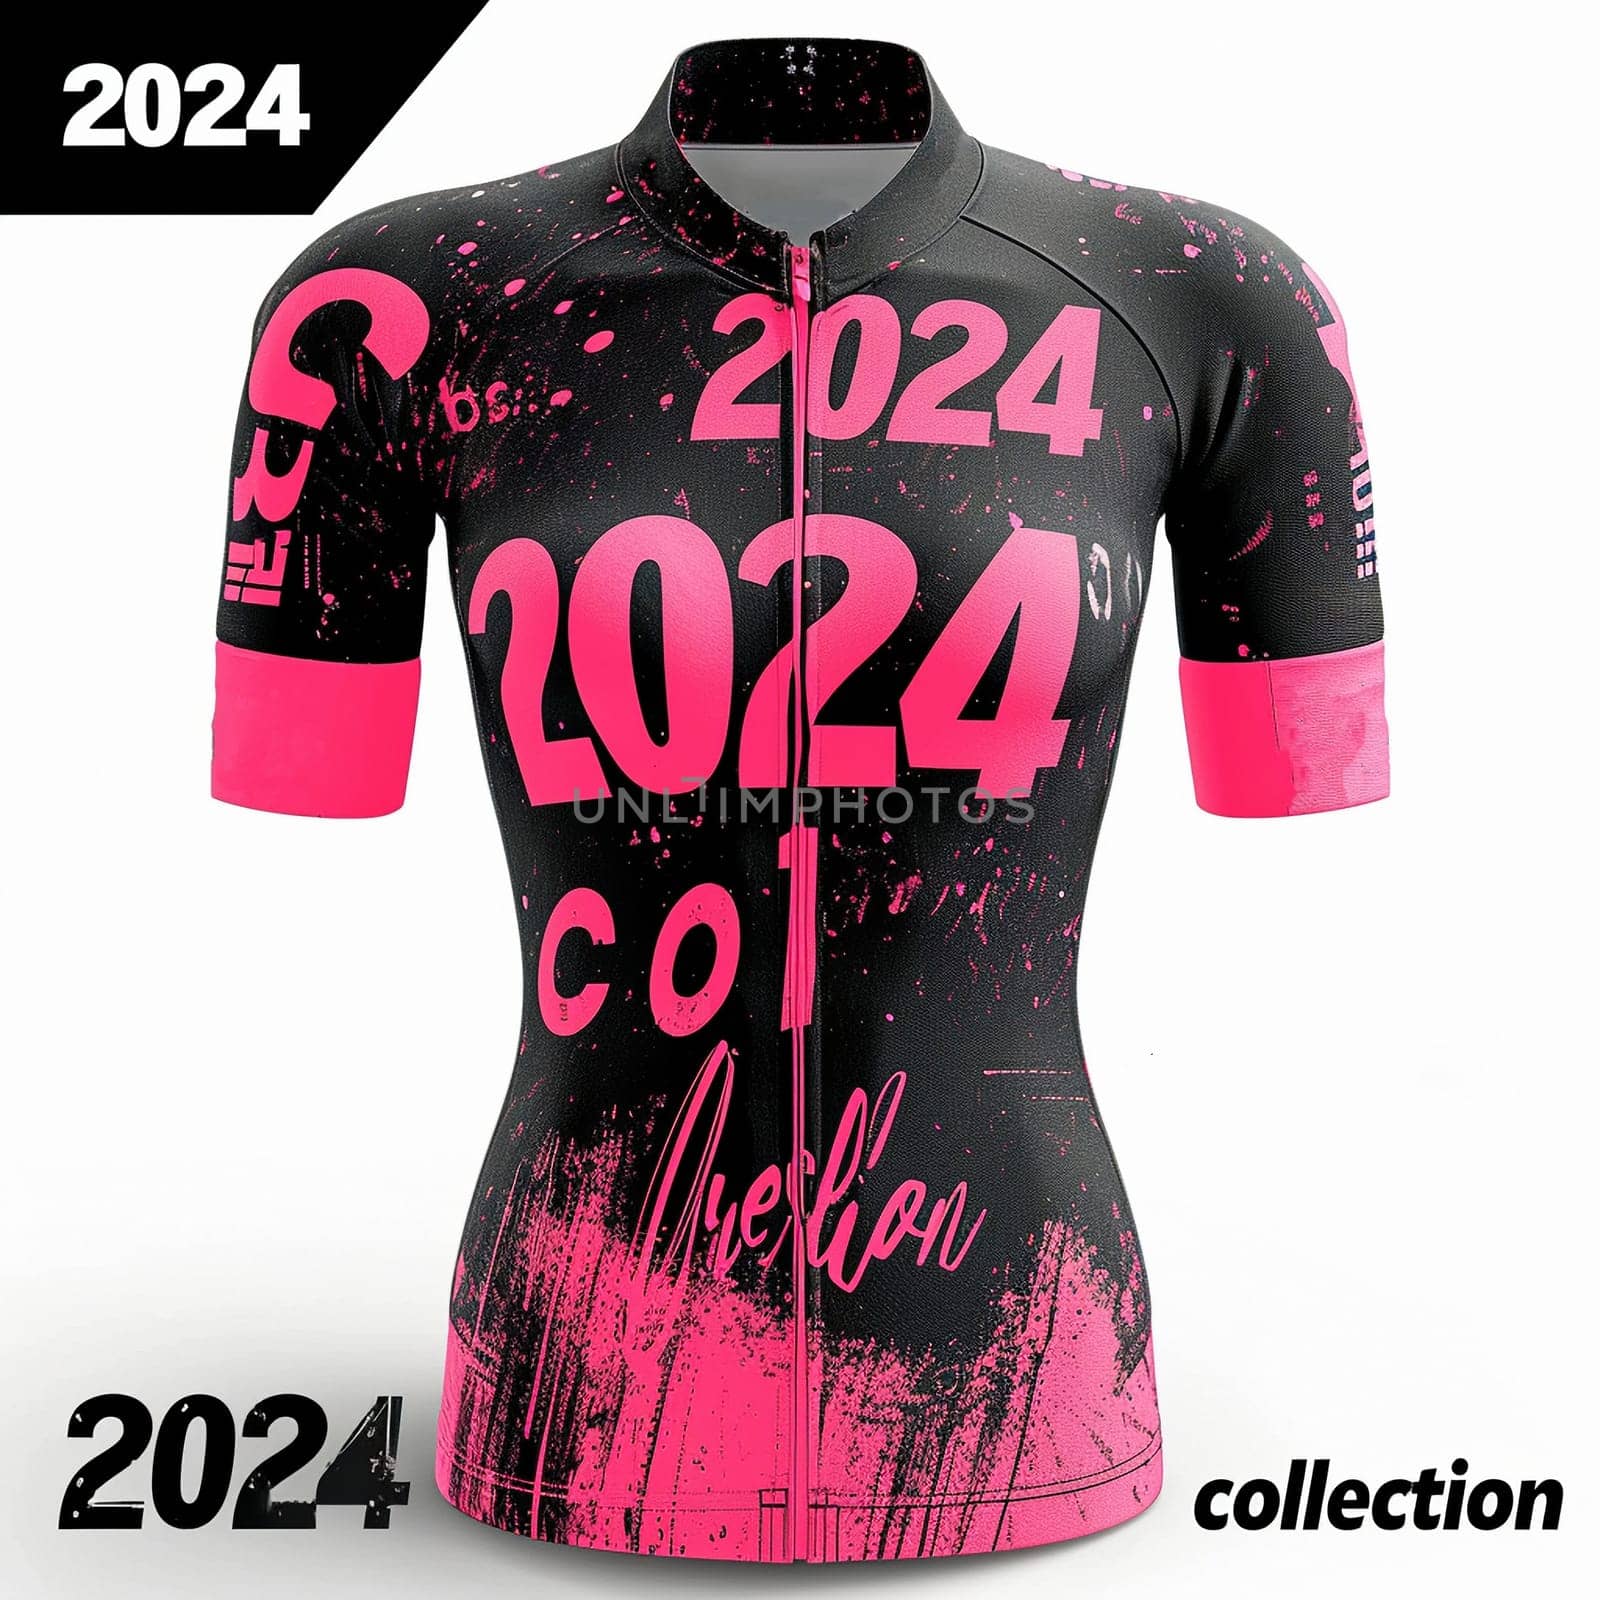 The design of women's sportswear. Collection 2024. Pink and black colors. Top. High quality illustration